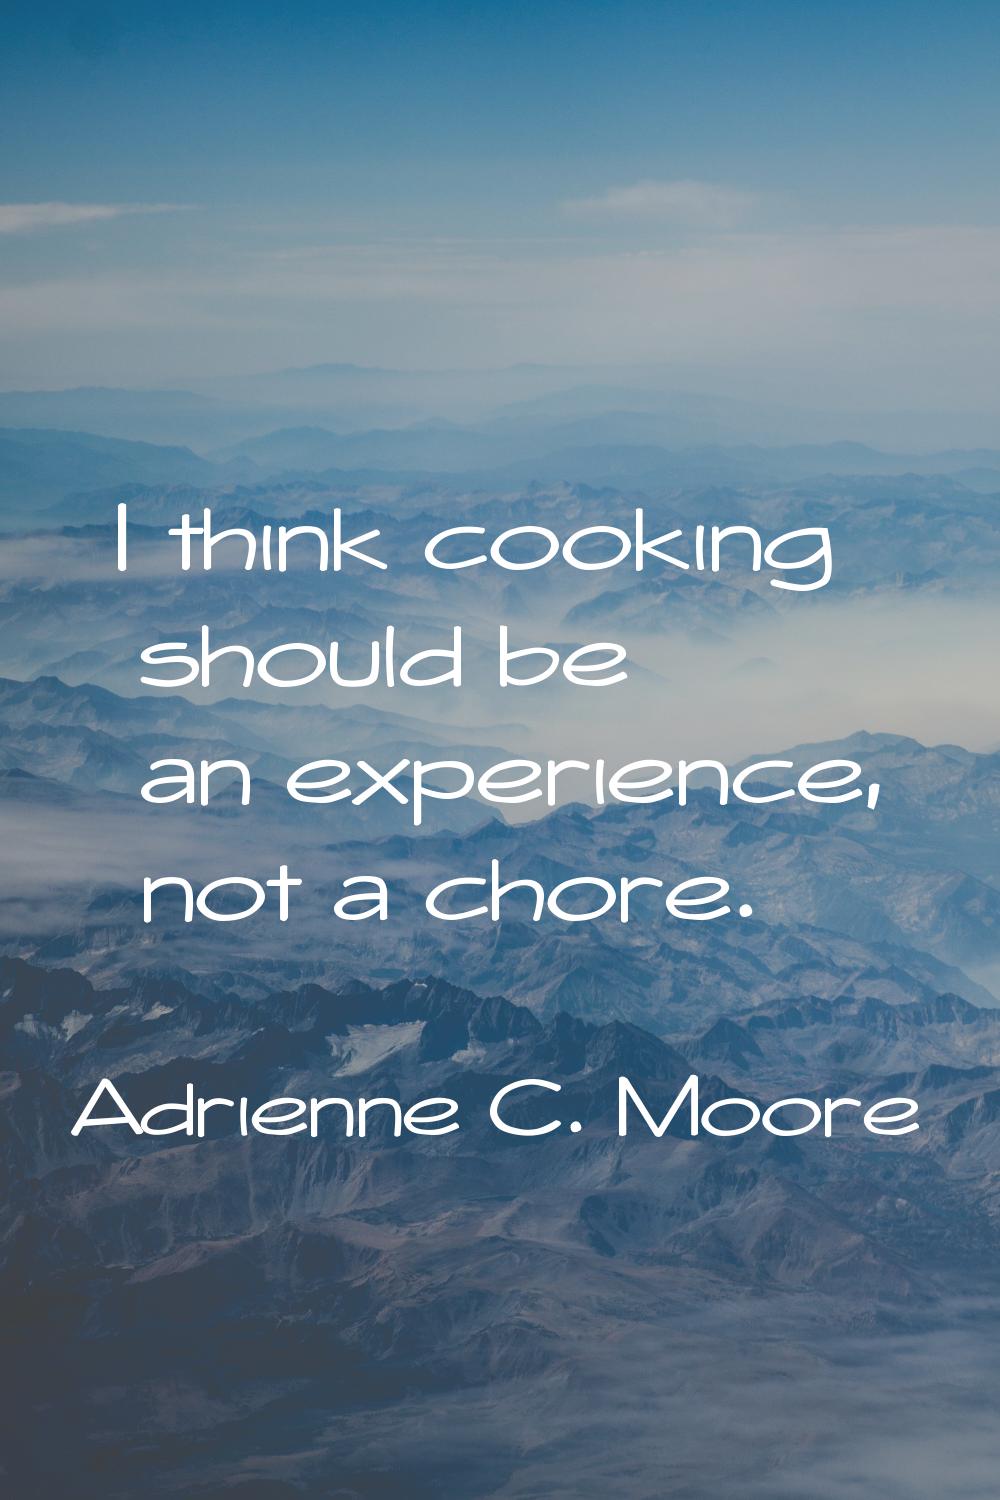 I think cooking should be an experience, not a chore.